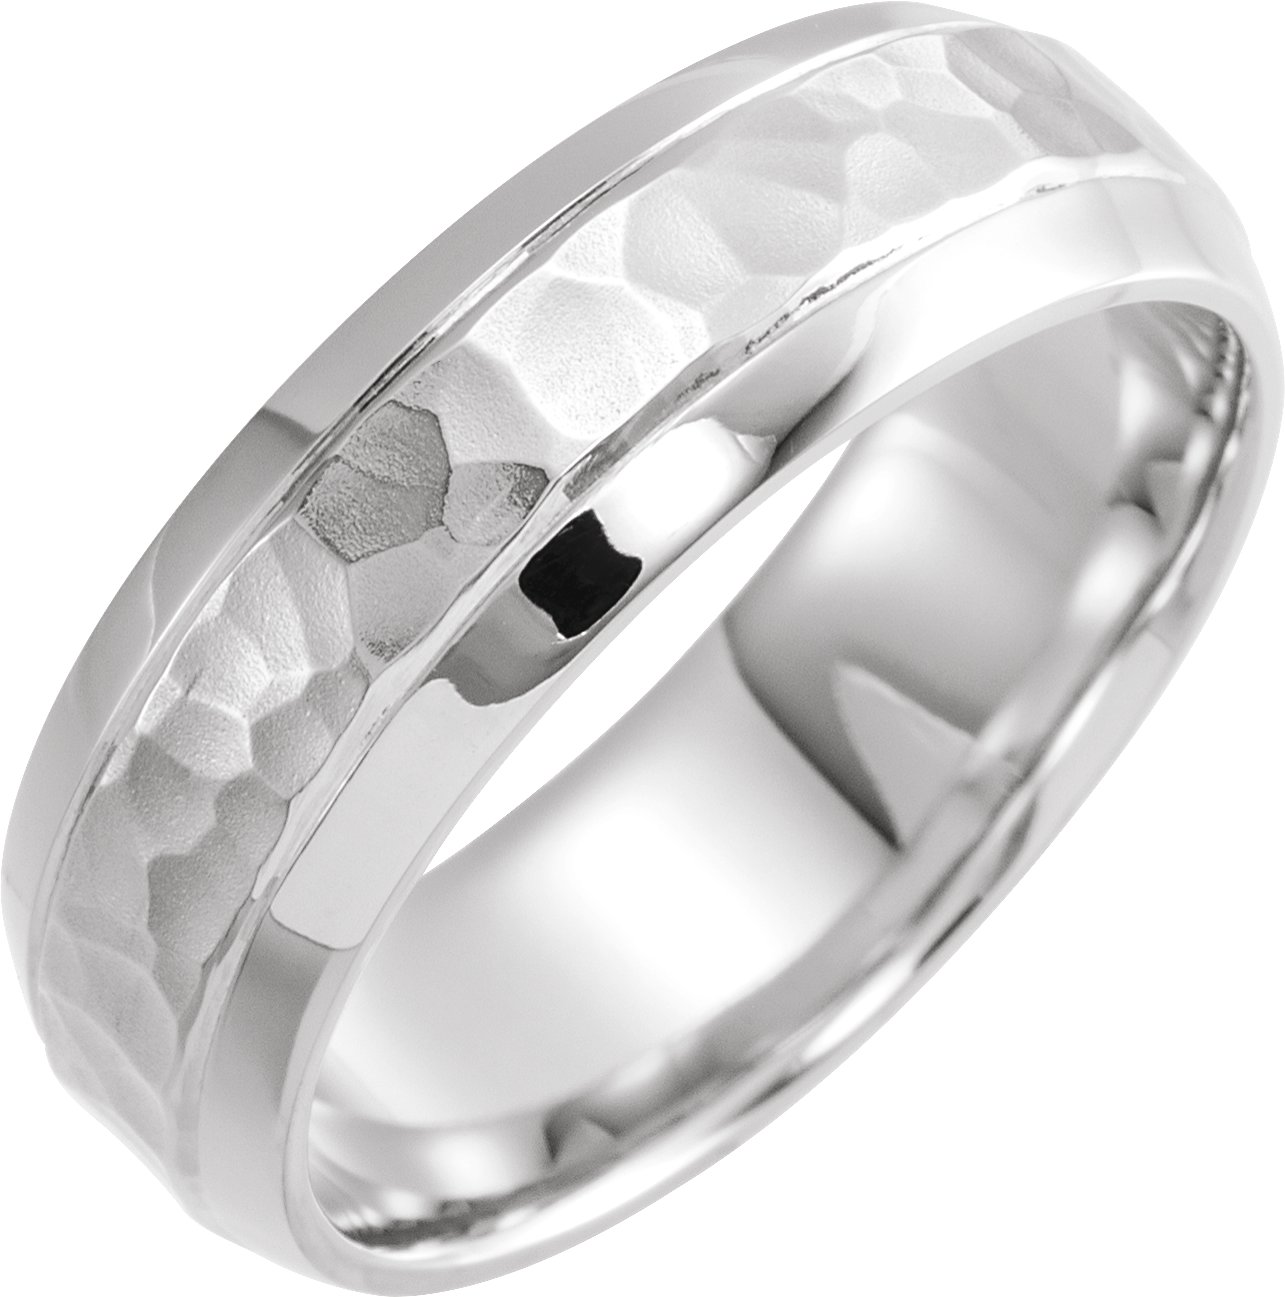 Platinum 7 mm Beveled-Edge Band with Hammered Texture Size 9